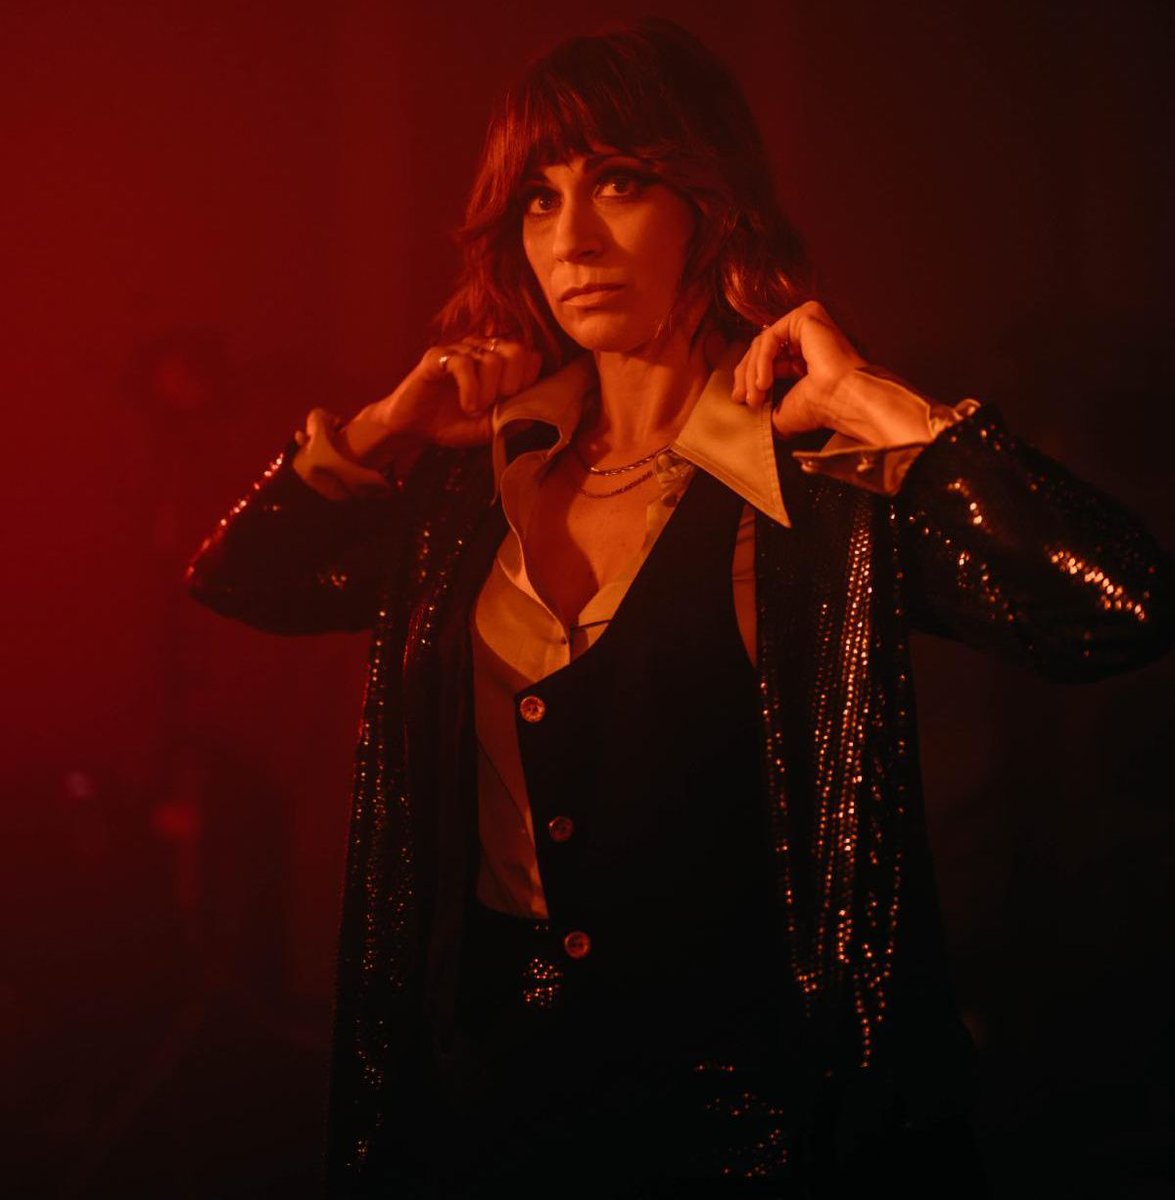 We're thrilled that the divine @nicoleatkins is hosting #FUVCheer with an electrifying lineup of the @gaslightanthem, @gracepotter, @ironandwine, and @theesacredsouls  coming together at the @BeaconTheatre on 12/6 to benefit FUV. Get your tix today: buff.ly/45cFG2X